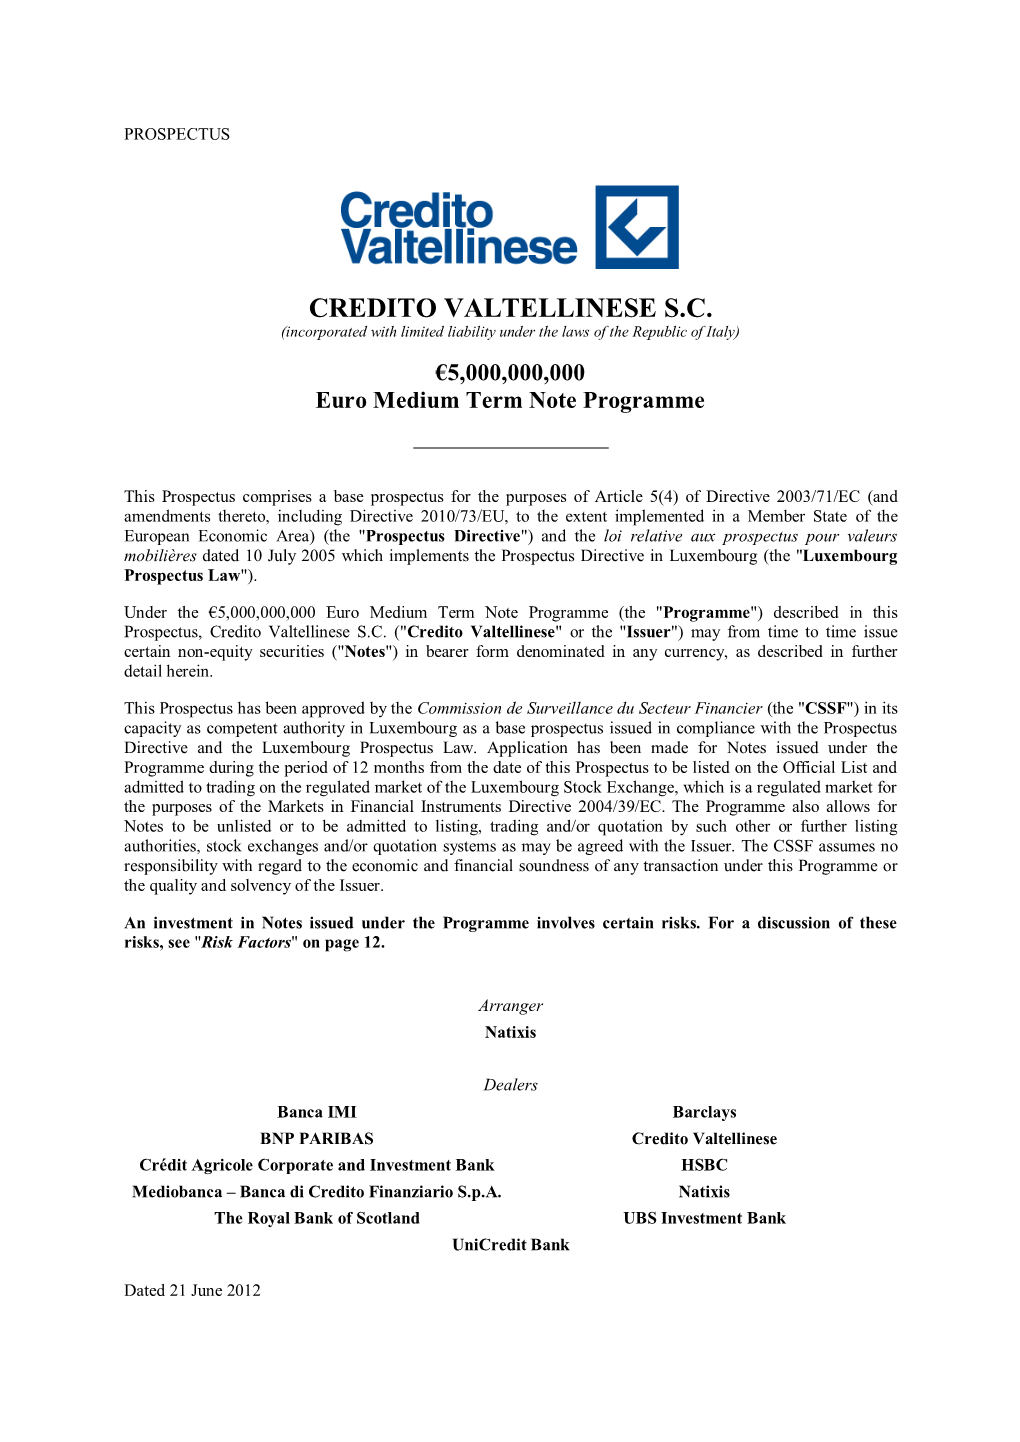 CREDITO VALTELLINESE S.C. (Incorporated with Limited Liability Under the Laws of the Republic of Italy) €5,000,000,000 Euro Medium Term Note Programme